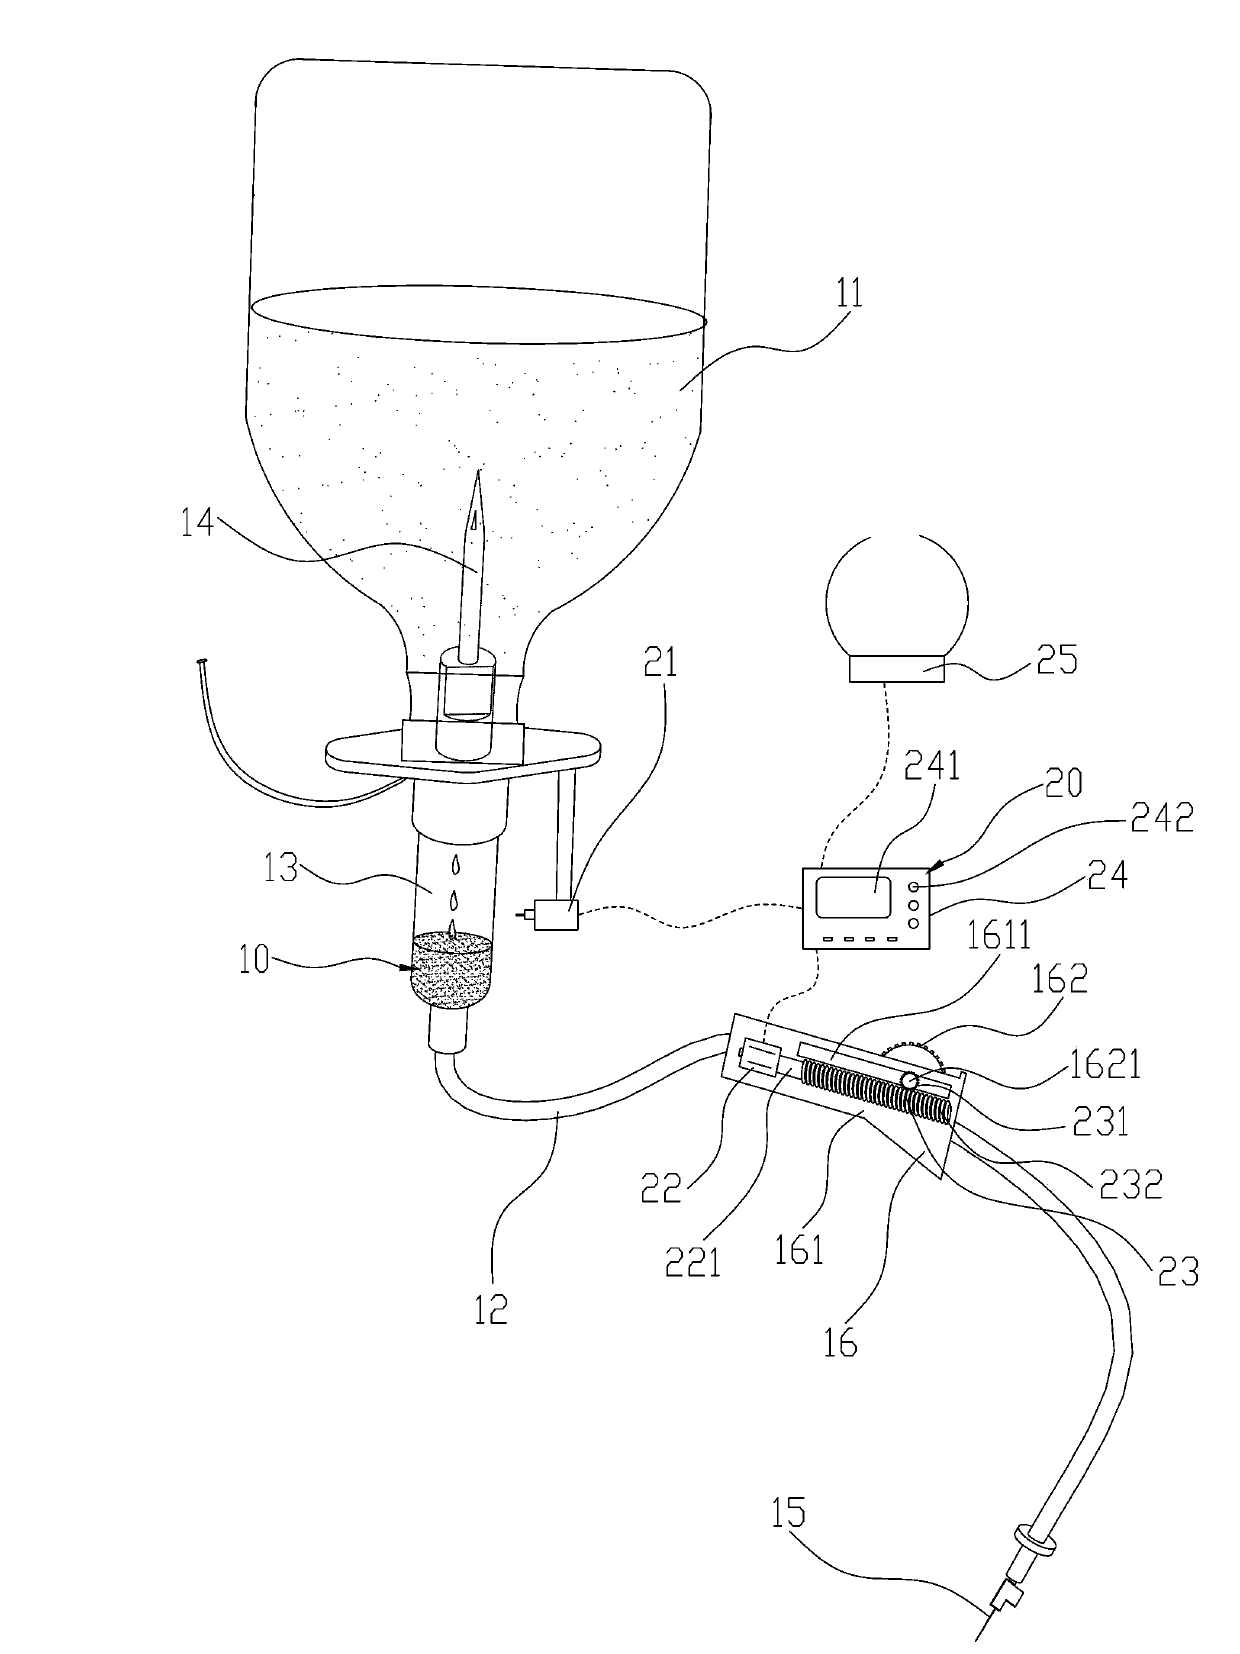 Infusion-bottle monitoring device